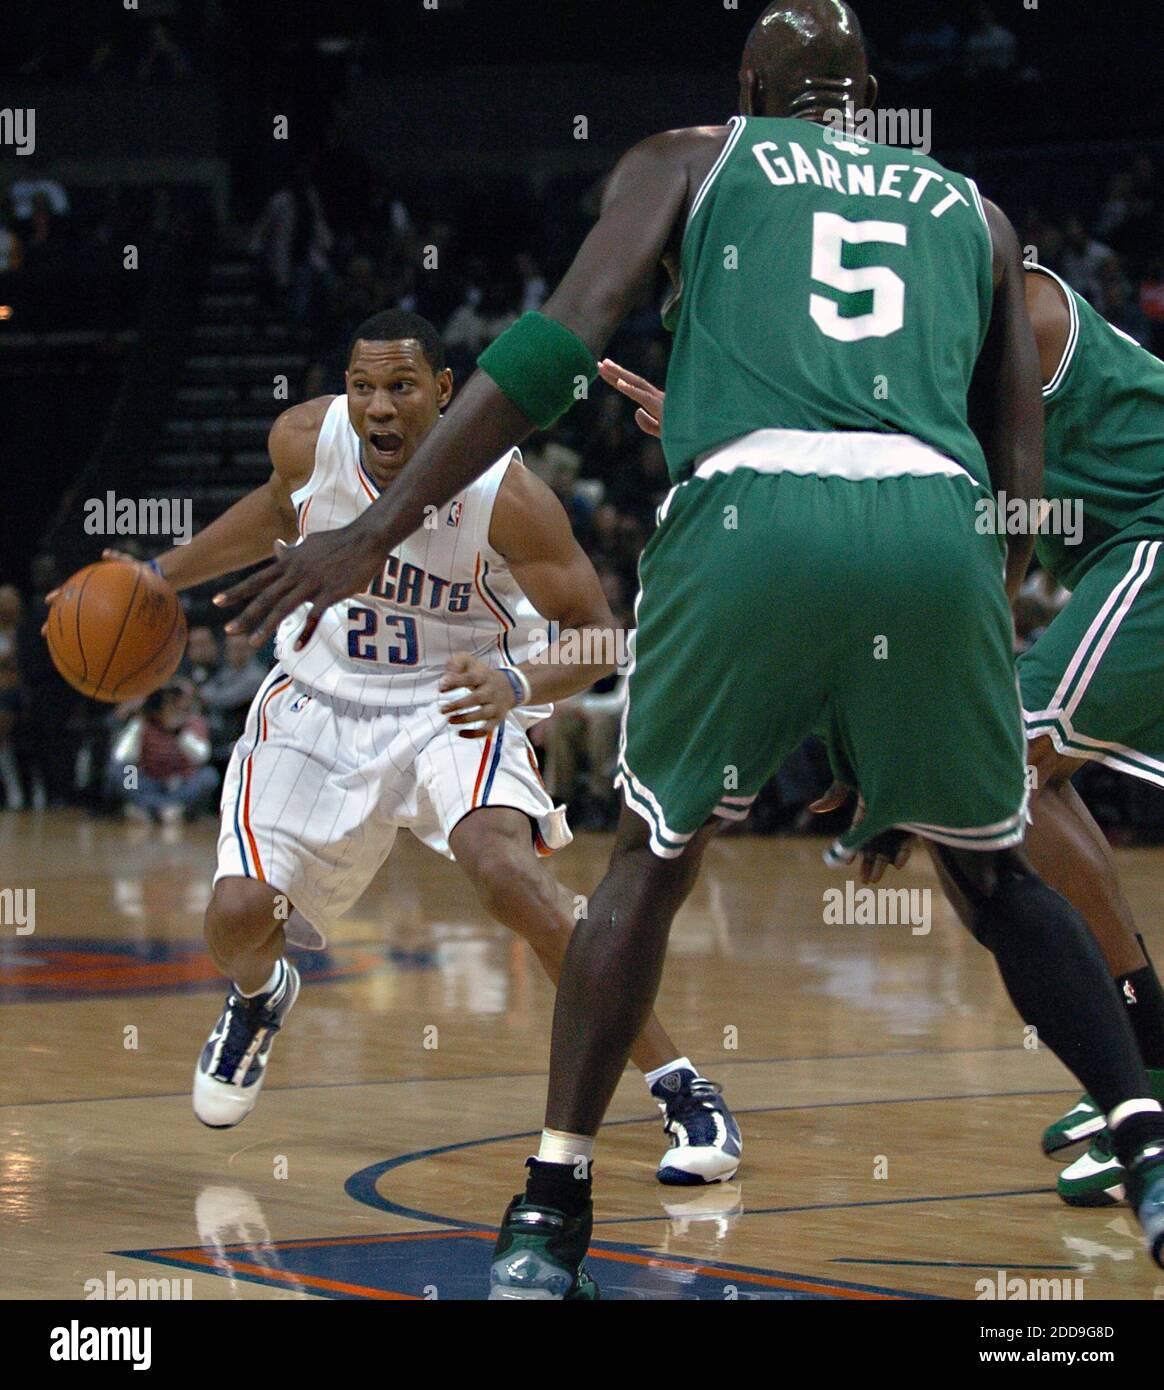 NO FILM, NO VIDEO, NO TV, NO DOCUMENTARY - Charlotte Bobcats' Stephen Graham (23) drives the ball to the basket against Boston Celtics' Kevin Garrett during NBA action in Charlotte, NC, USA on December 1, 2009. Photo by T. Ortega Gaines/Charlotte Observer/MCT/Cameleon/ABACAPRESS.COM Stock Photo